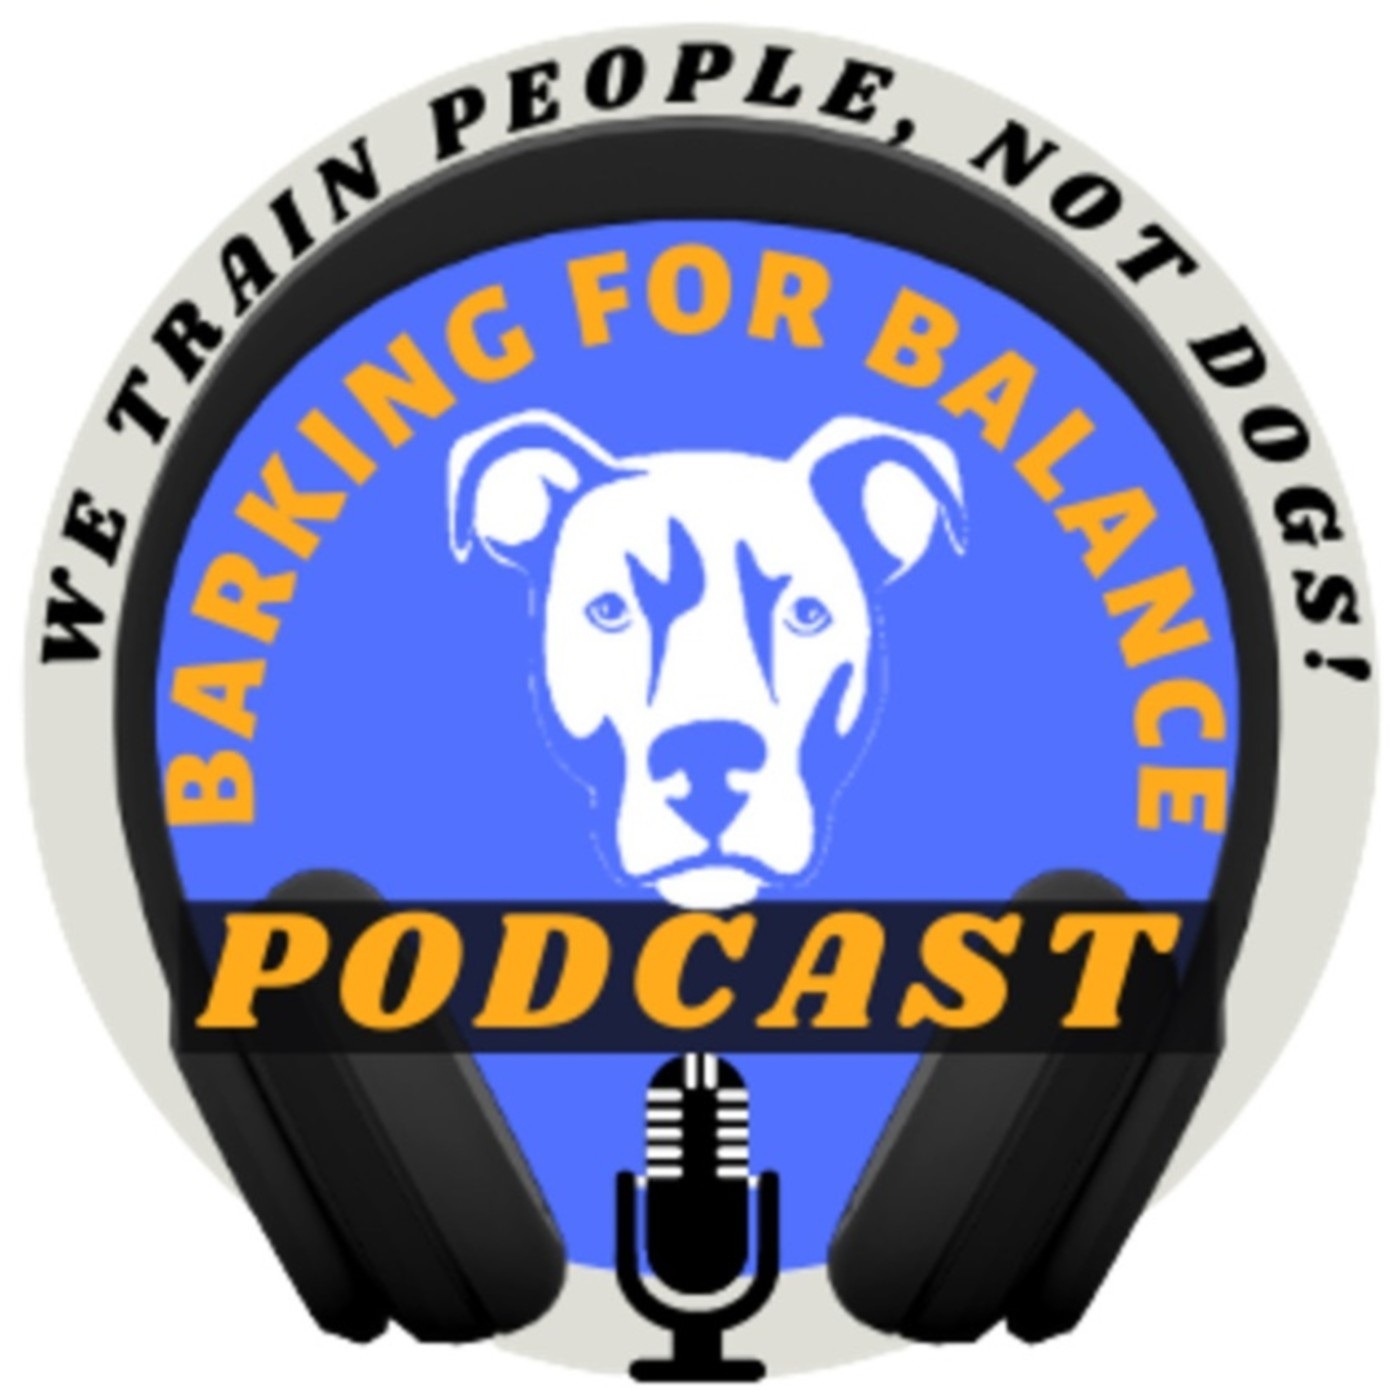 #32 | On This Emotional Episode, Pat Honors The Memory Of Junior (Cesar Millan's Pitbull), & Explains How Junior Helped Him Overcome His Fear Of Pitbulls, Allowed Him To Adopt A Troubled Pitbull (Socks), Saved Socks From Going Back To The Shelter, & Paved The Way For Pat To Become A Dog Behavior And Rehabilitation Specialist.